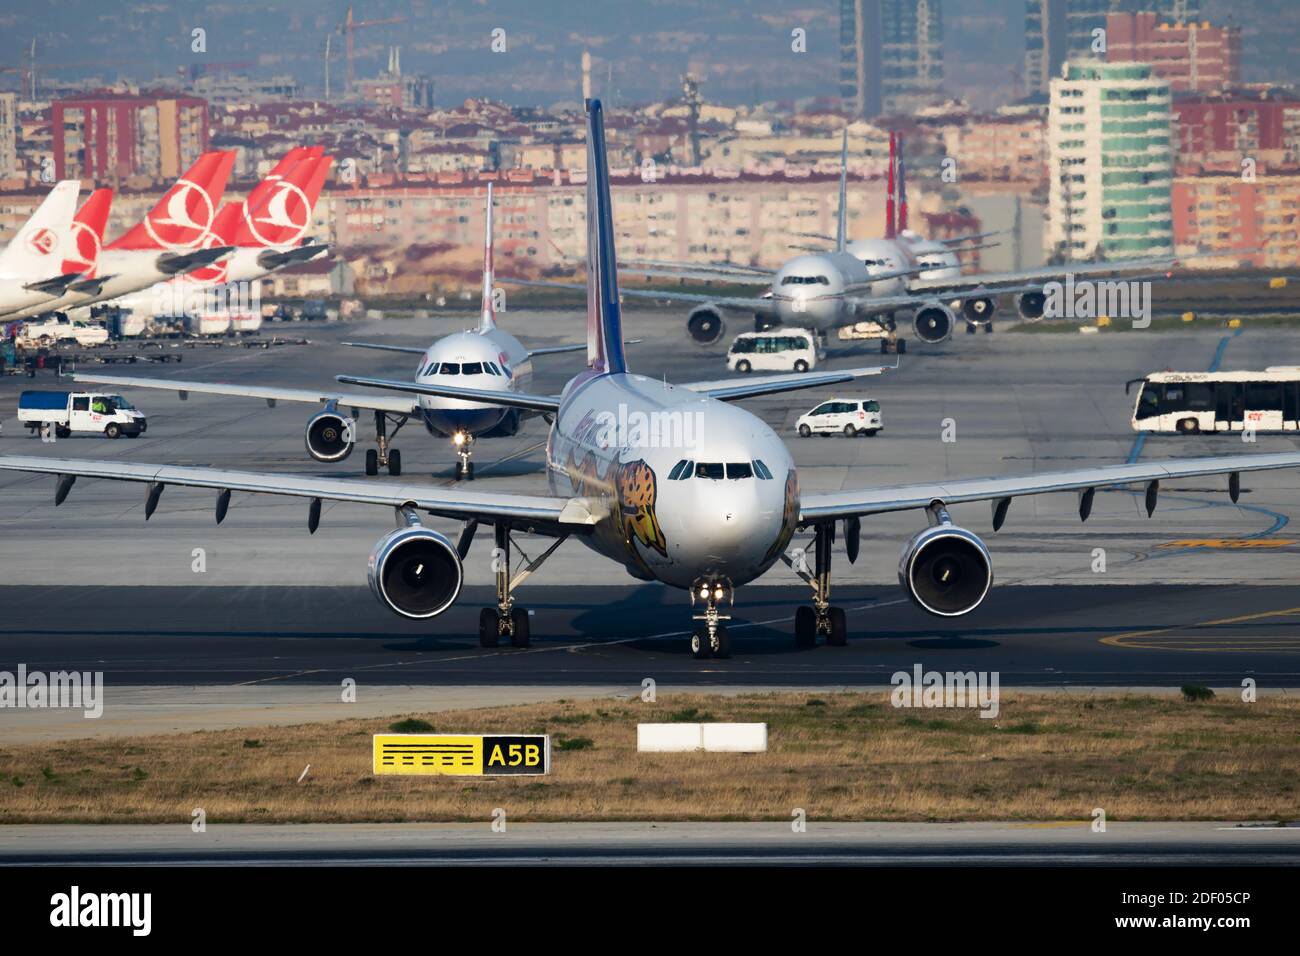 Istanbul / Turkey - March 27, 2019: Meraj Airlines special livery Airbus A300 EP-SIF passenger plane departure at Istanbul Ataturk Airport Stock Photo